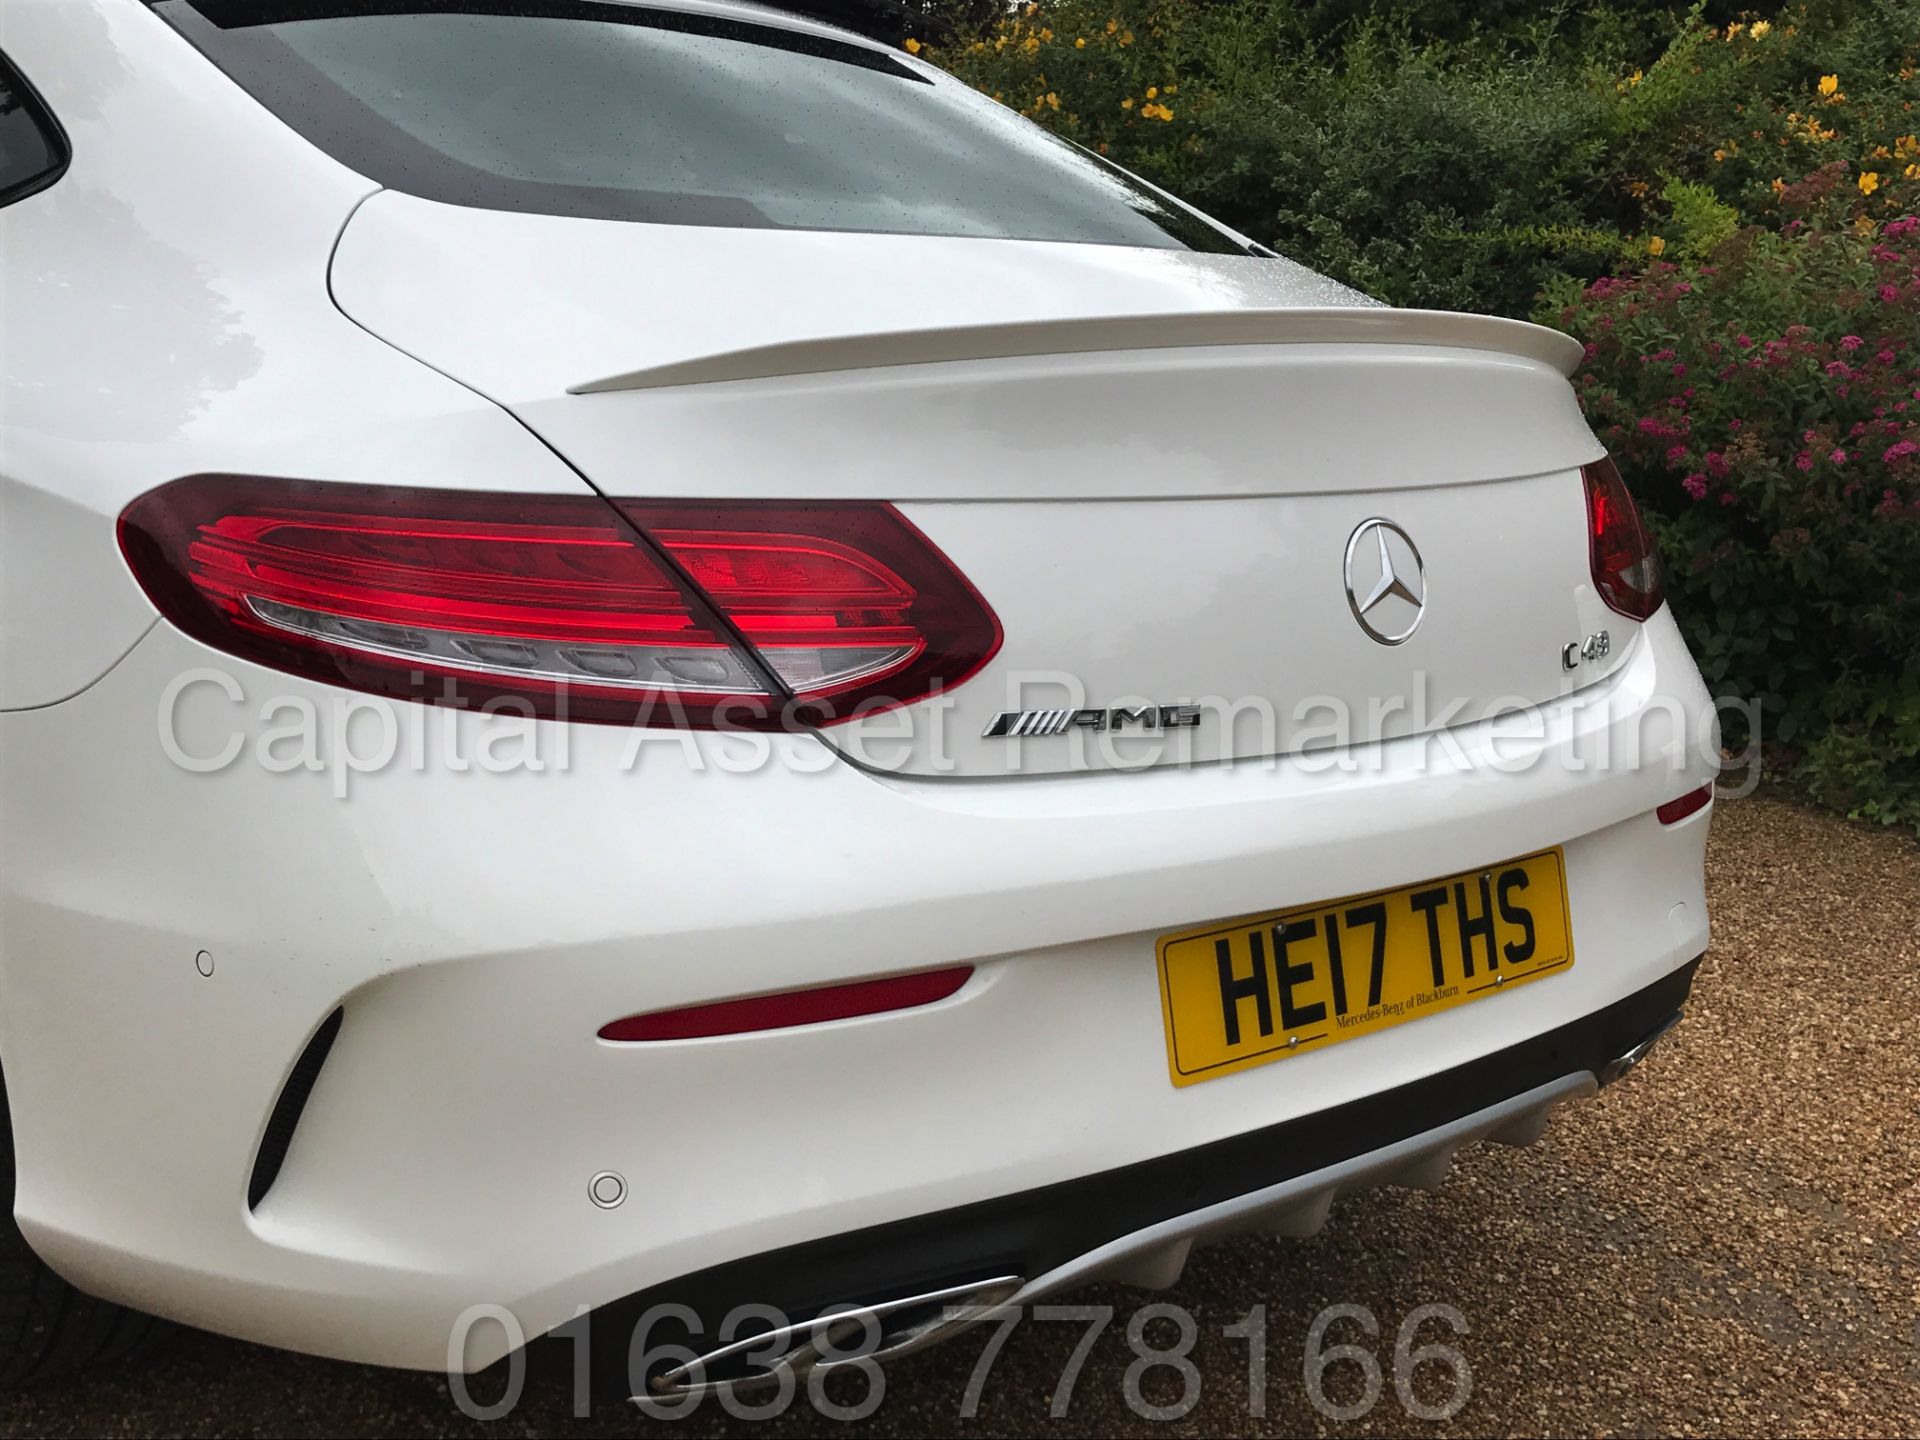 MEREDES-BENZ C43 AMG PREMIUM '4 MATIC' COUPE (2017) '9-G AUTO - LEATHER - SAT NAV' **FULLY LOADED** - Image 12 of 57